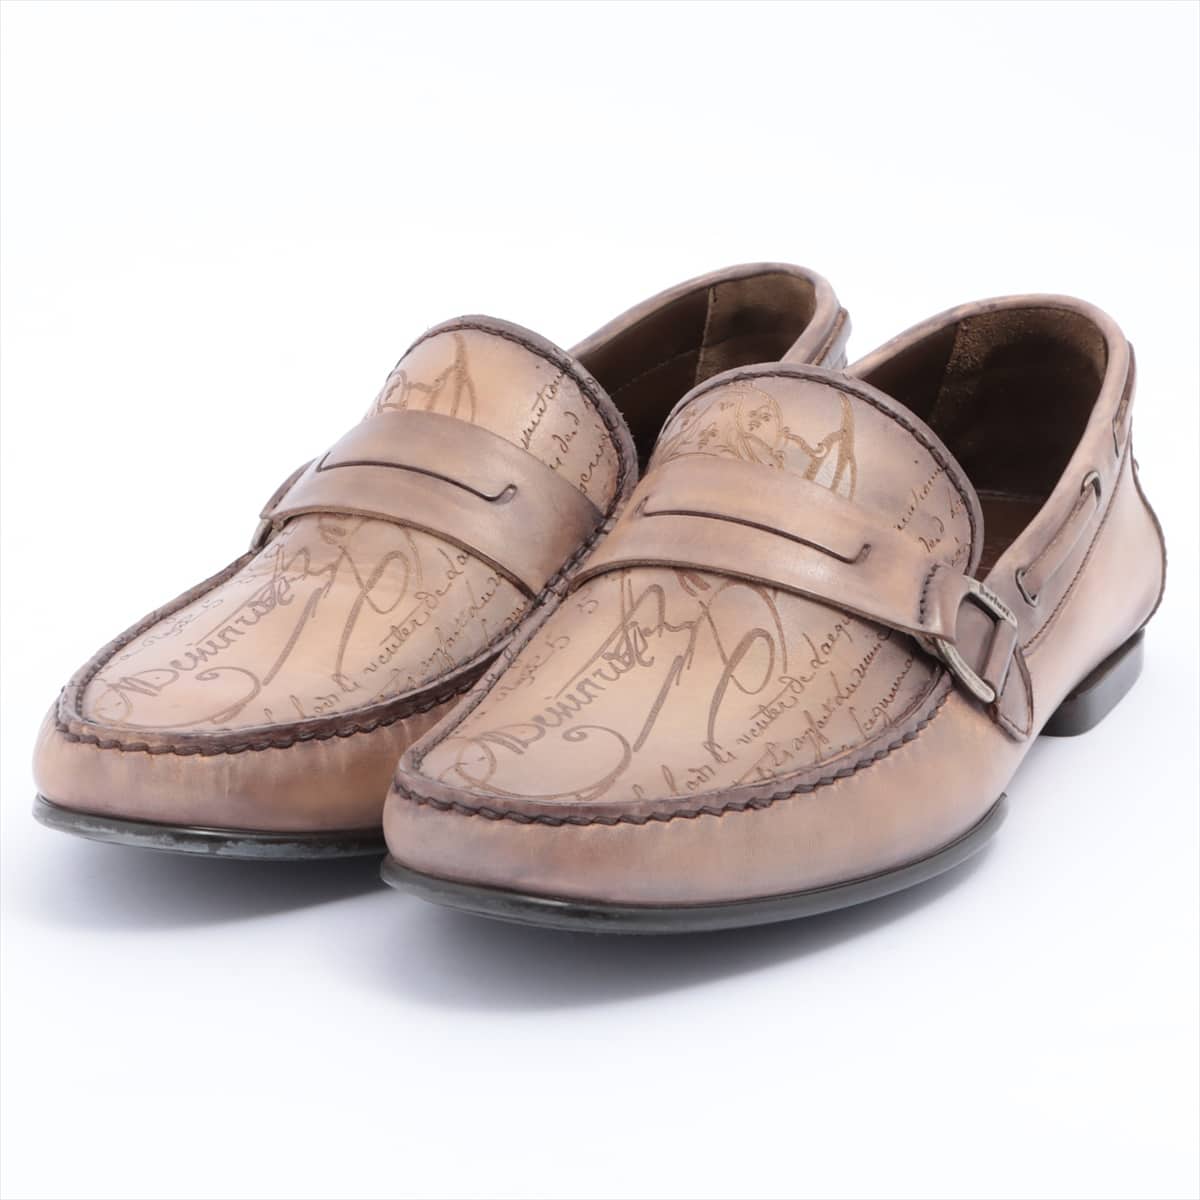 Berluti Calligraphy Leather Loafer 10 Men's Brown